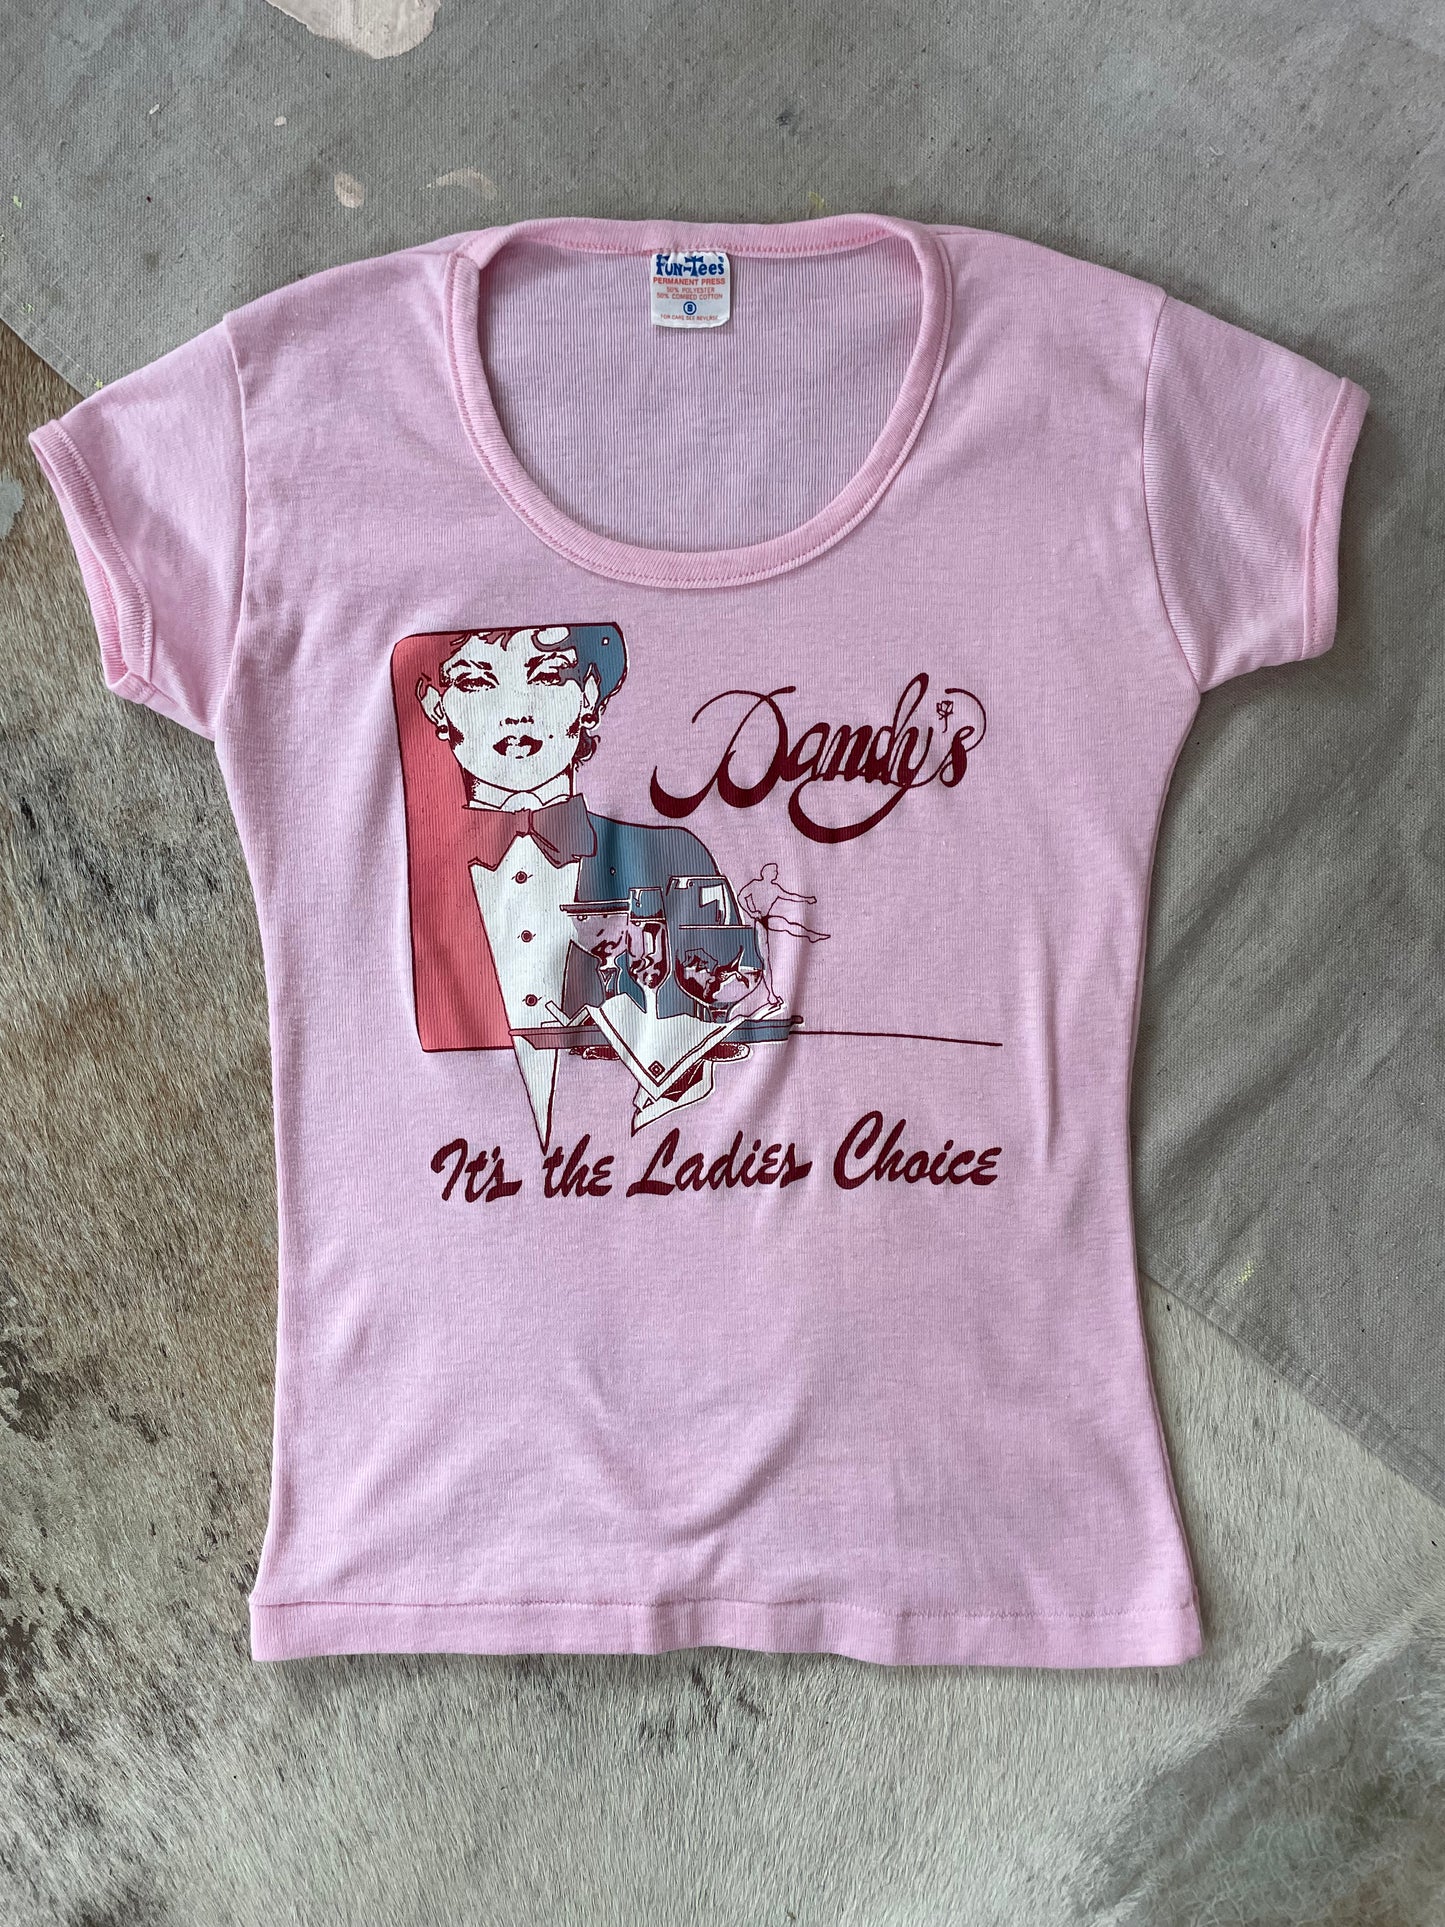 80s Dandy’s, It’s The Ladies Choice Adult Entertainment Club Tee